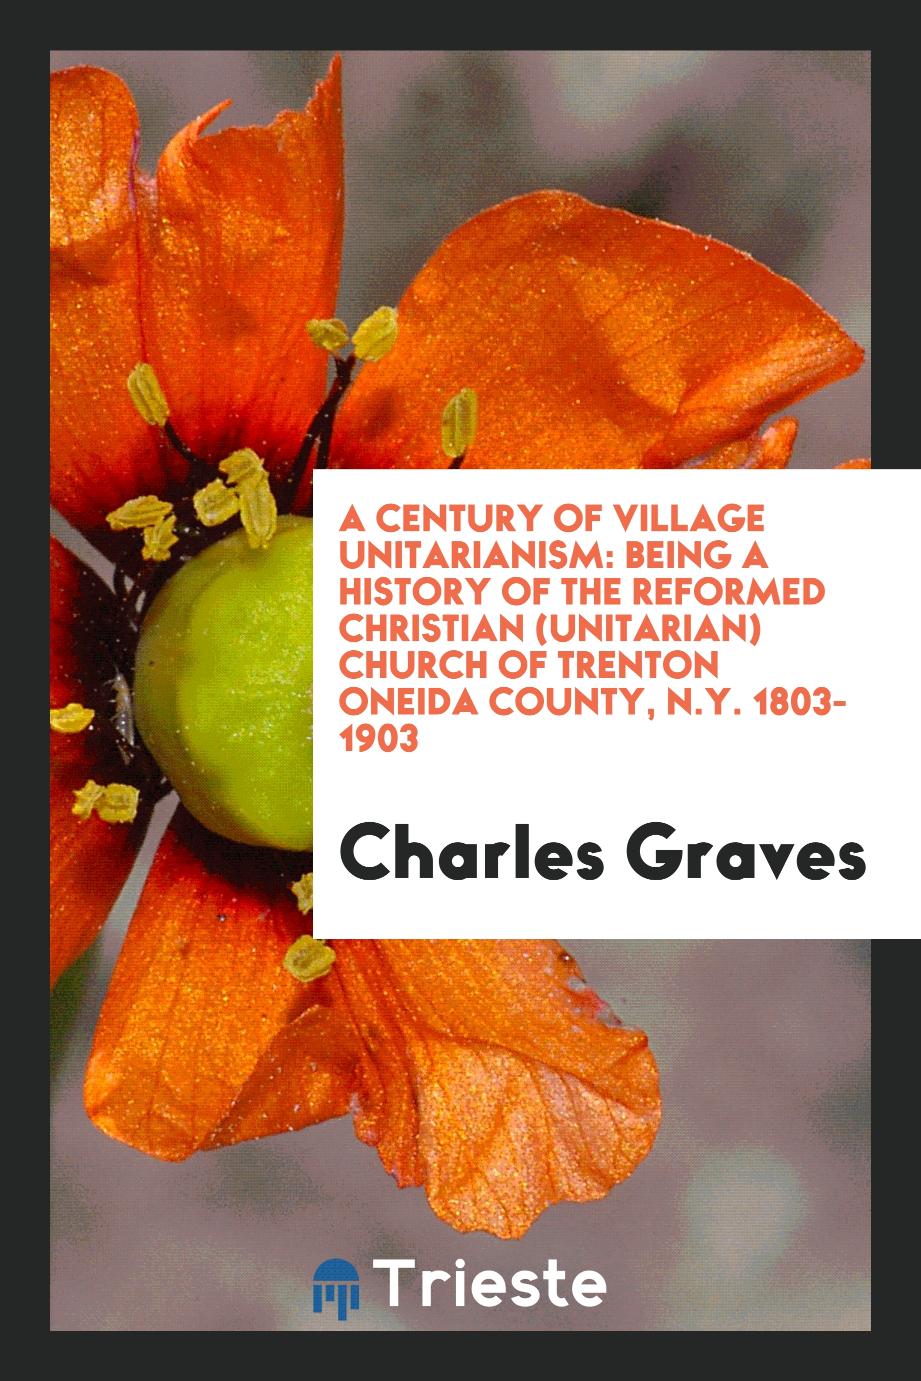 A Century of Village Unitarianism: Being a History of the Reformed Christian (Unitarian) Church of Trenton Oneida County, N.Y. 1803-1903